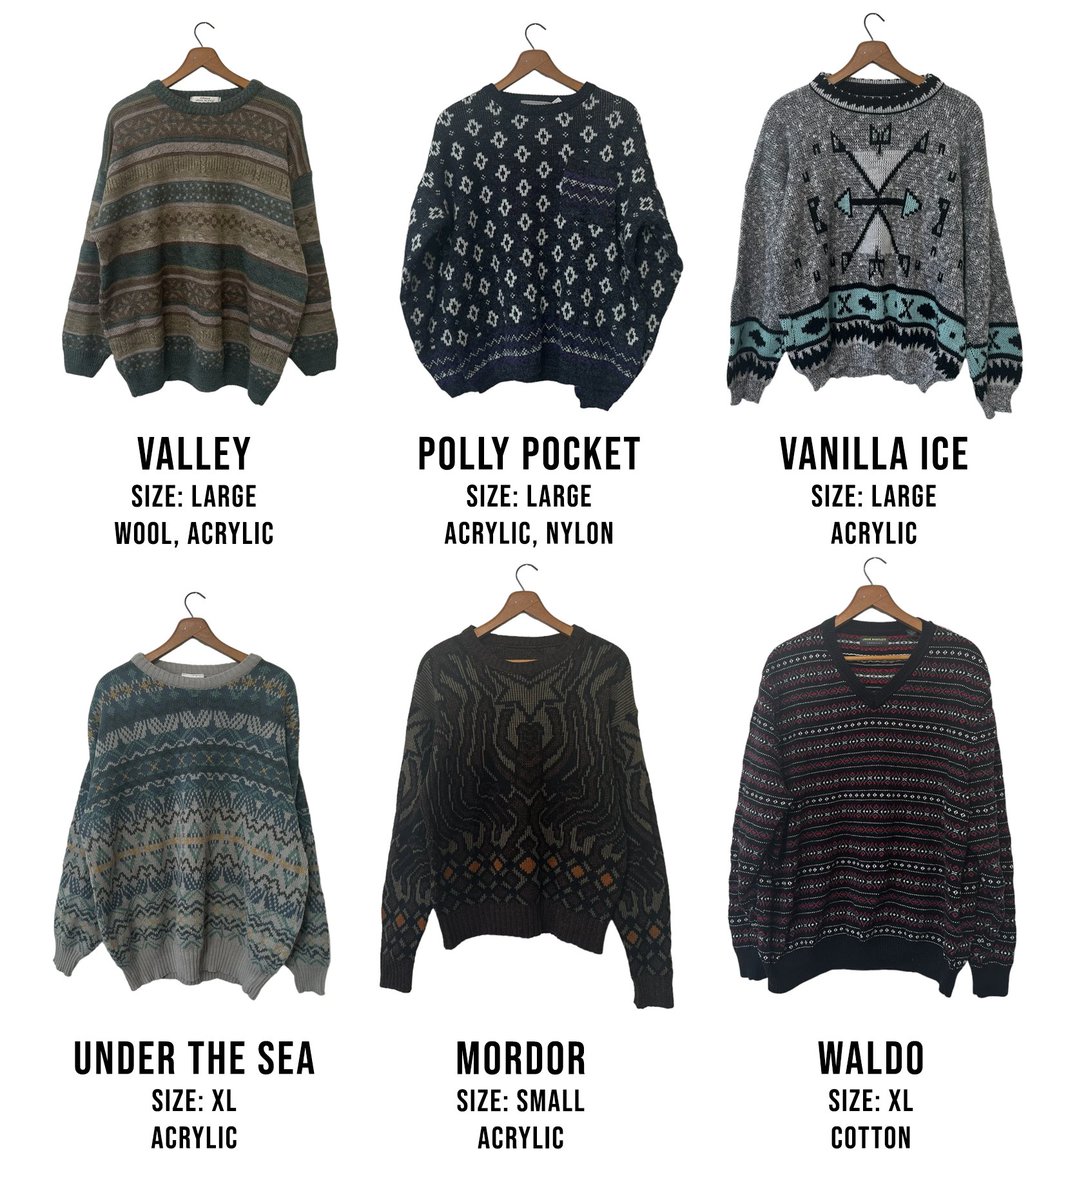 New vintage sweaters are up! Choose your favorite from the dozens of options! 🤠 #vintagesweaters #ilovethe90s #80svibes #sweaters